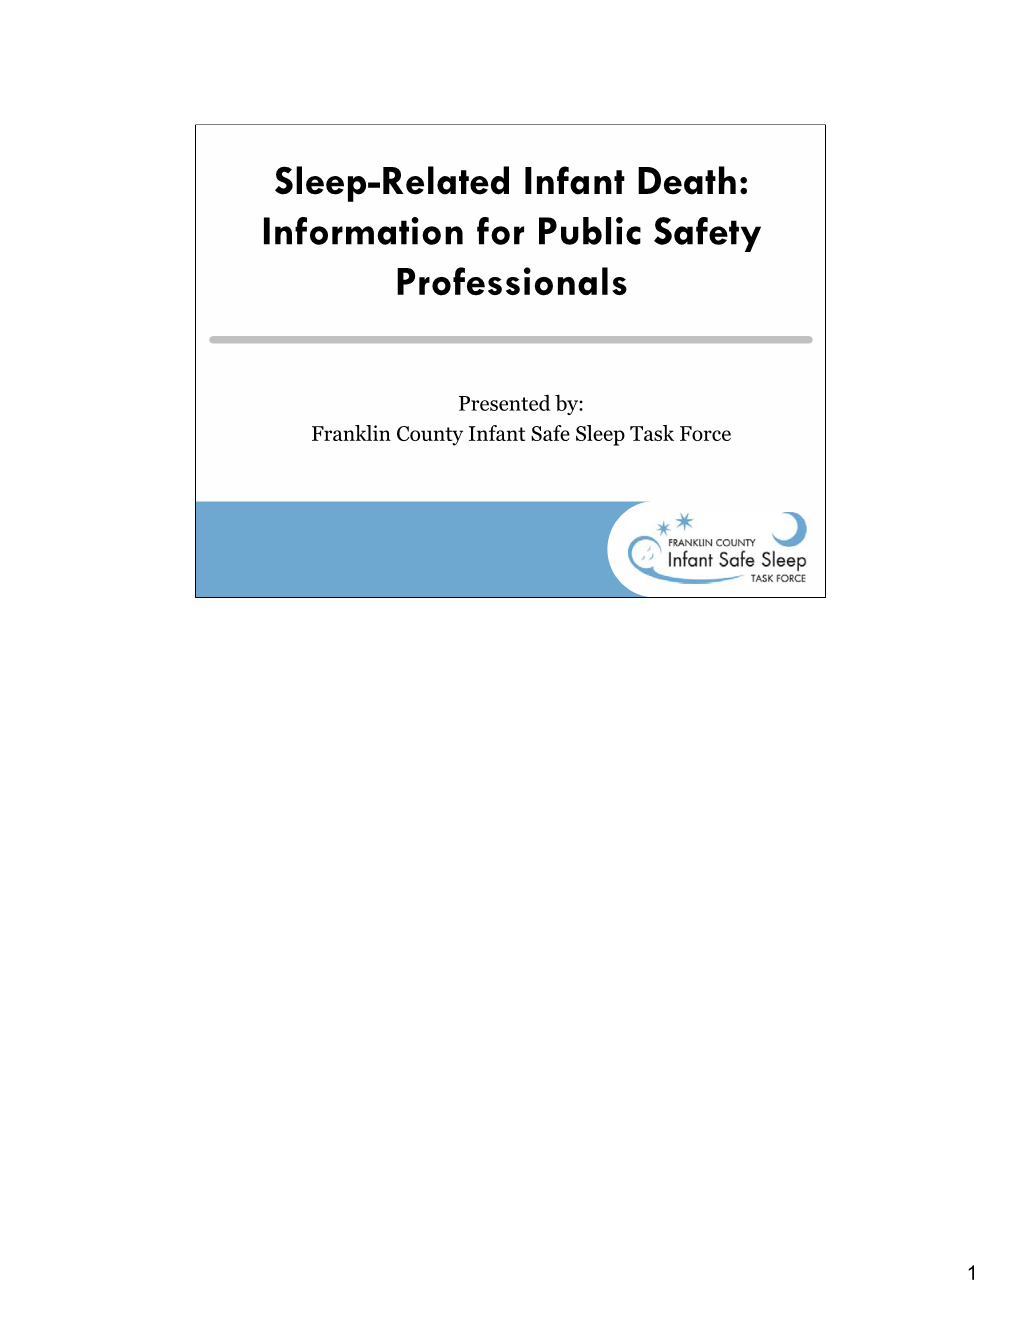 Sleep-Related Infant Death: Information for Public Safety Professionals